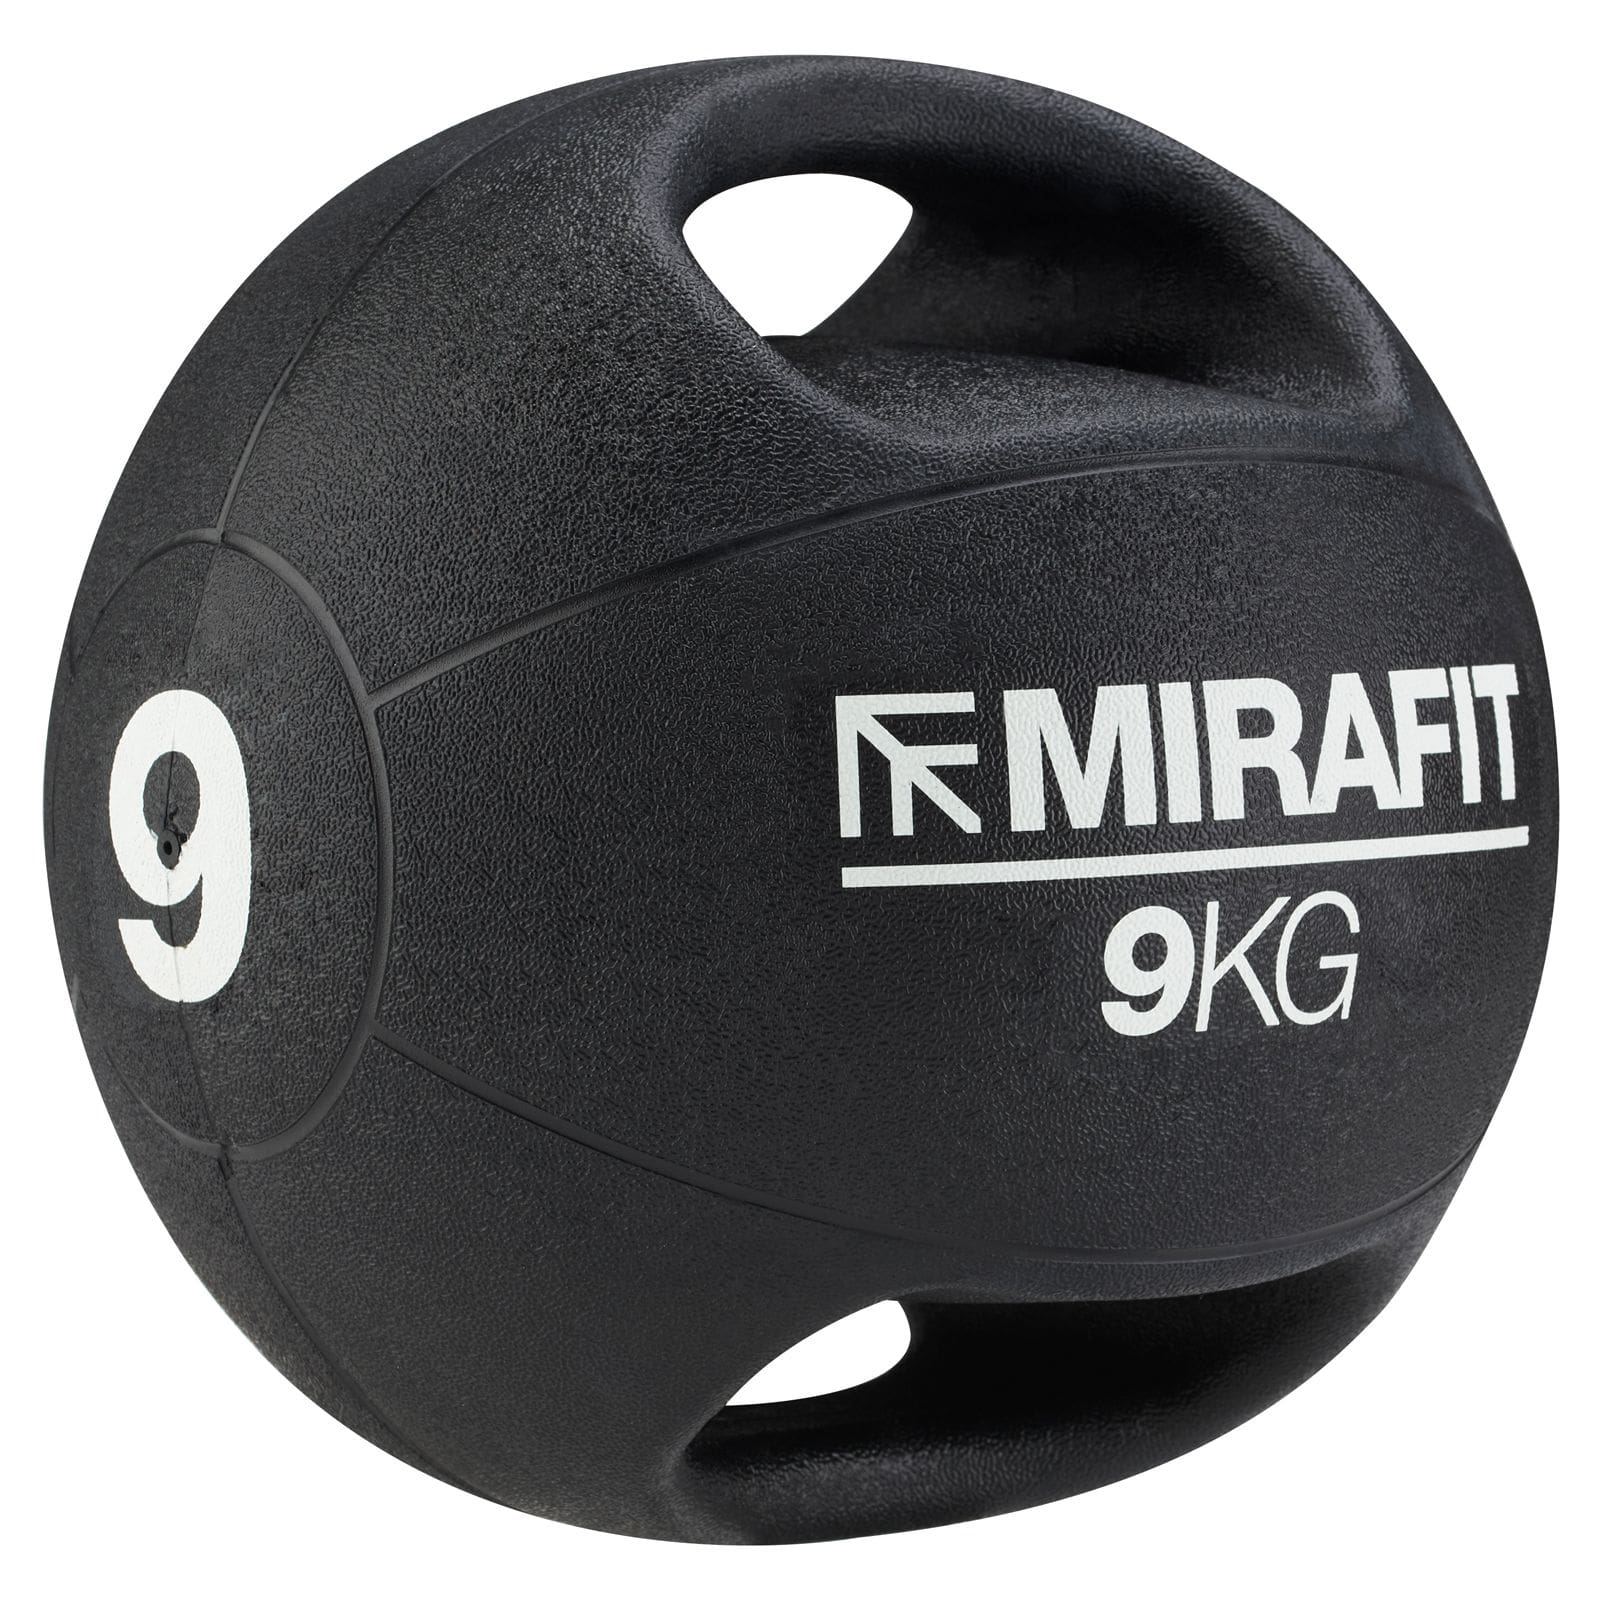 Weights of the Mirafit medicine ball with handles 9kg front view